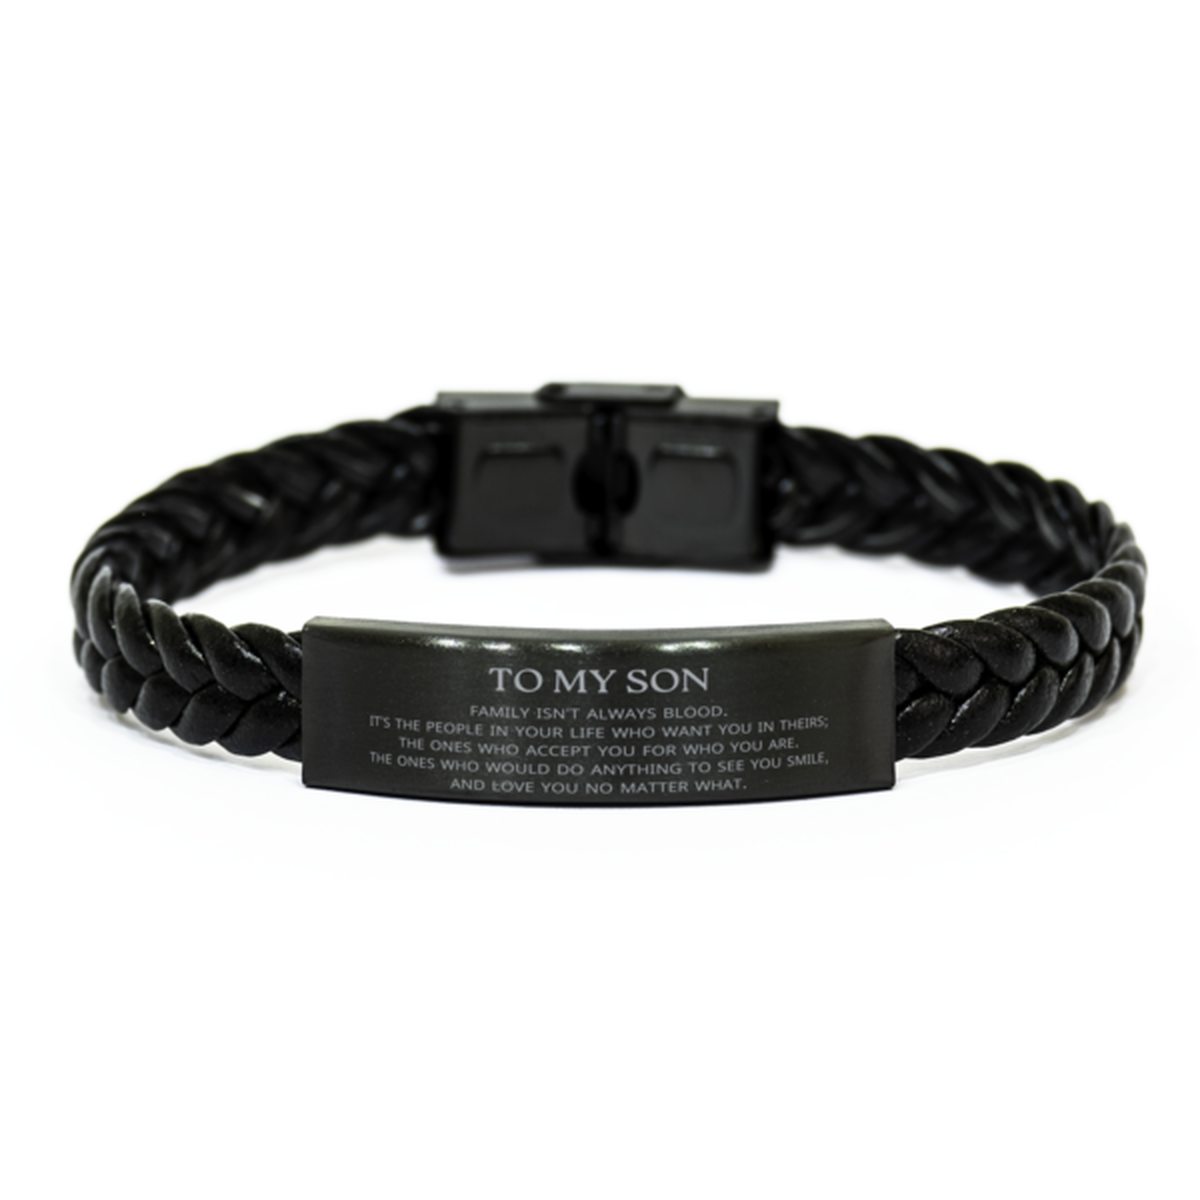 To My Son Gifts, Family isn't always blood, Son Braided Leather Bracelet, Birthday Christmas Unique Present For Son